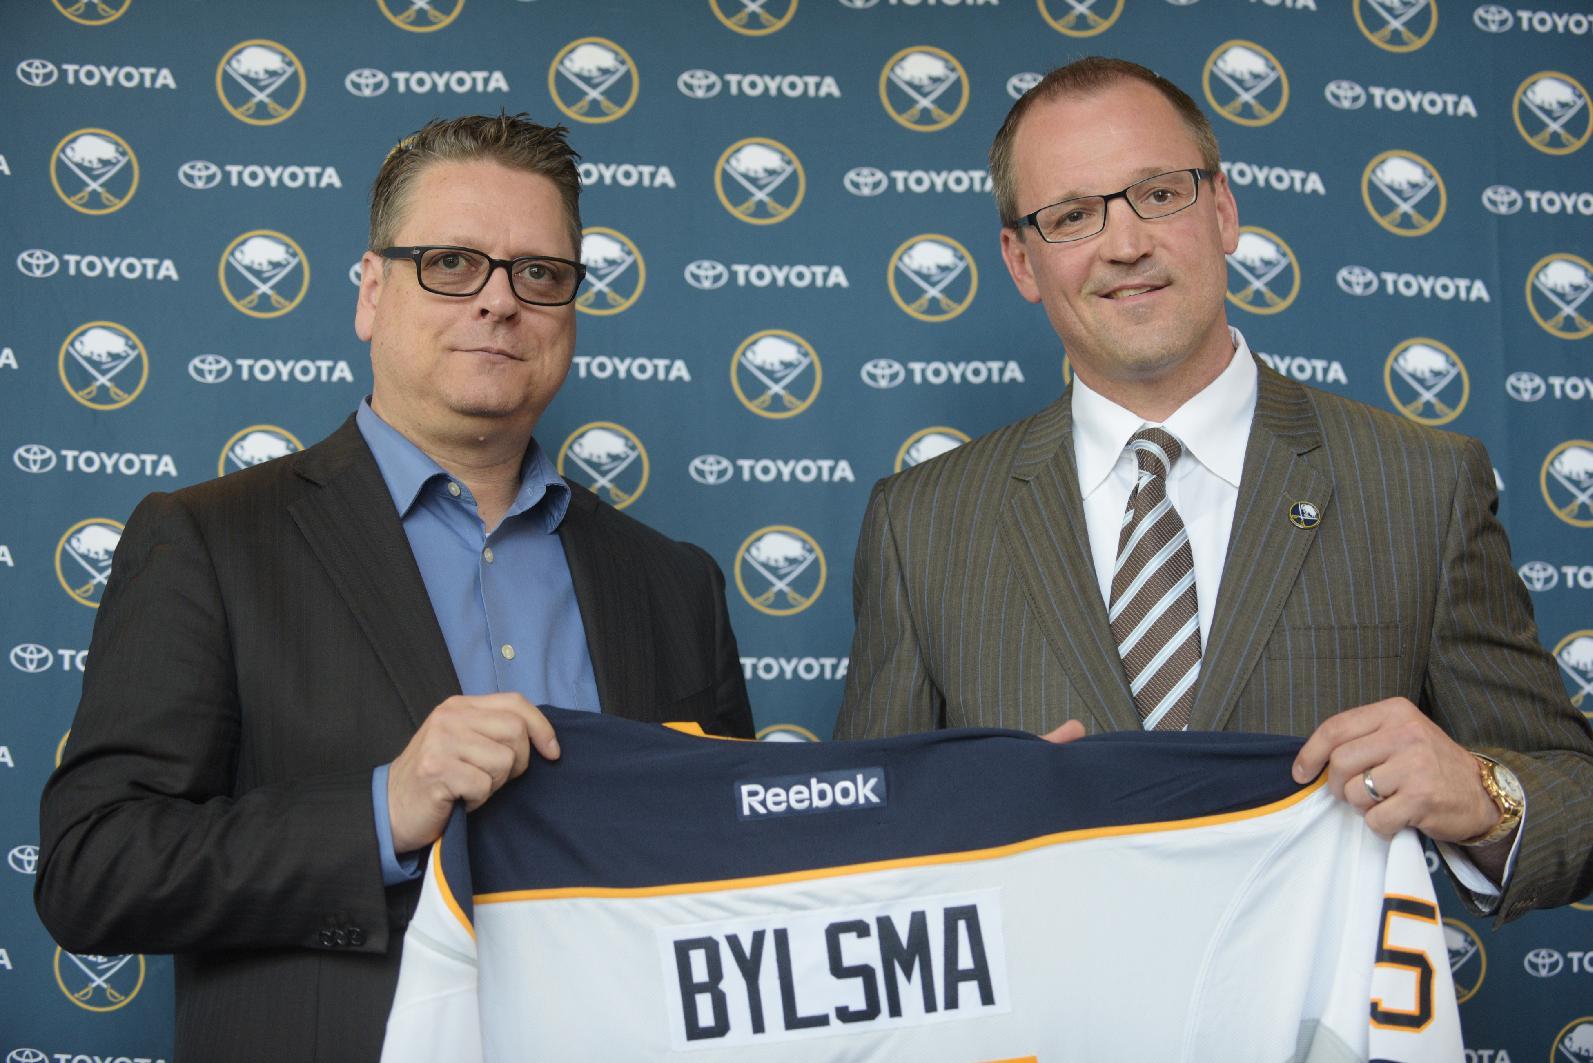 Buffalo Sabres GM Tim Murray, left, and newly hired coach Dan Bylsma hold a Sabres' jersey as they pose for a photo after a news conference Thursday, May 28, 2015, in Buffalo, N.Y. A week after losing out on Mike Babcock, the Buffalo Sabres went with another experienced Stanley Cup winner by hiring Dan Bylsma to become their next coach. (AP Photo/Gary Wiepert)